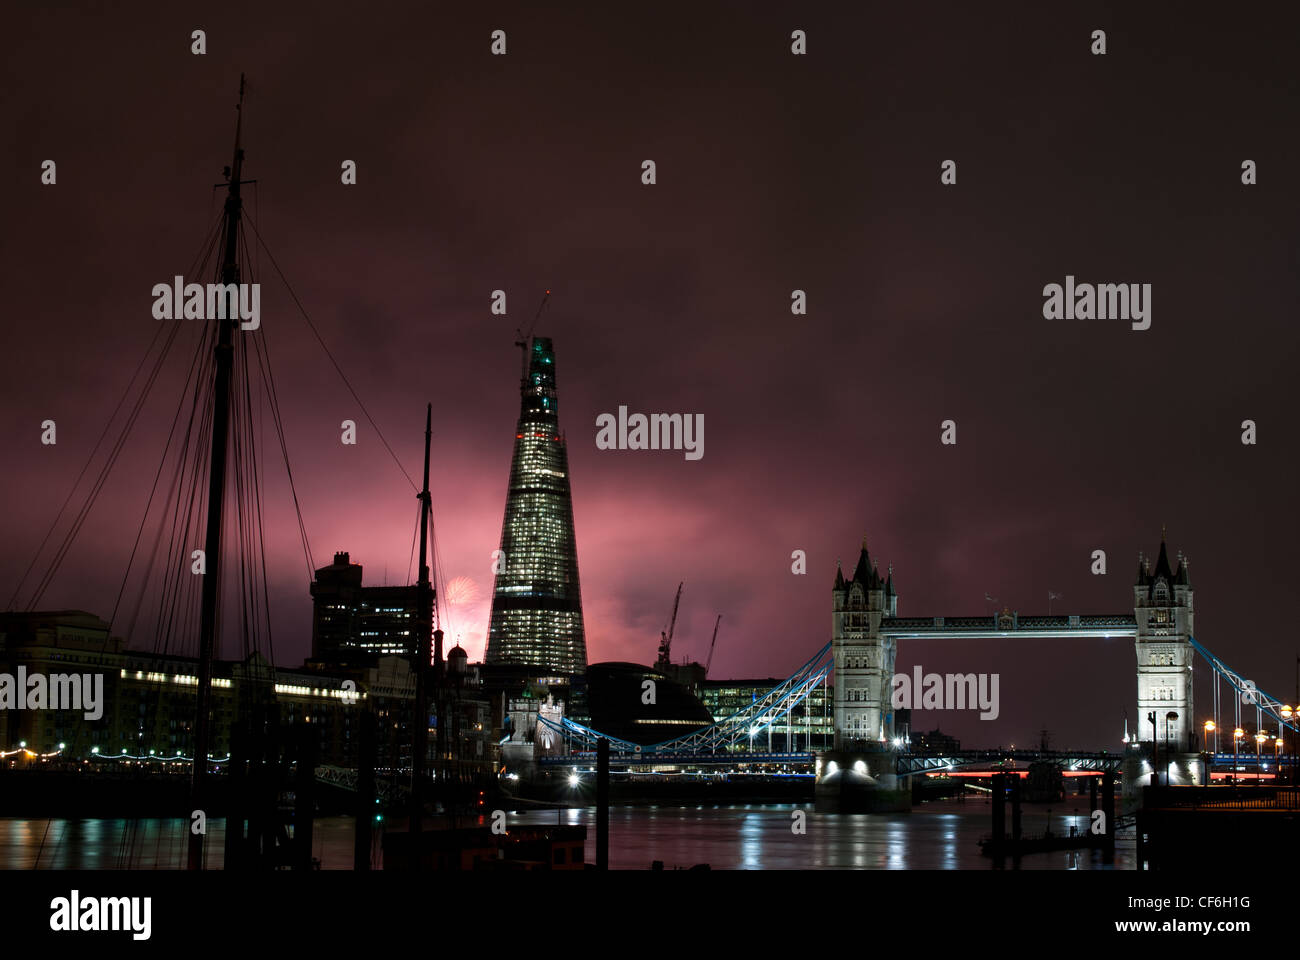 Tower Bridge, the Shard and river  Thames  New Years Eve fireworks Stock Photo